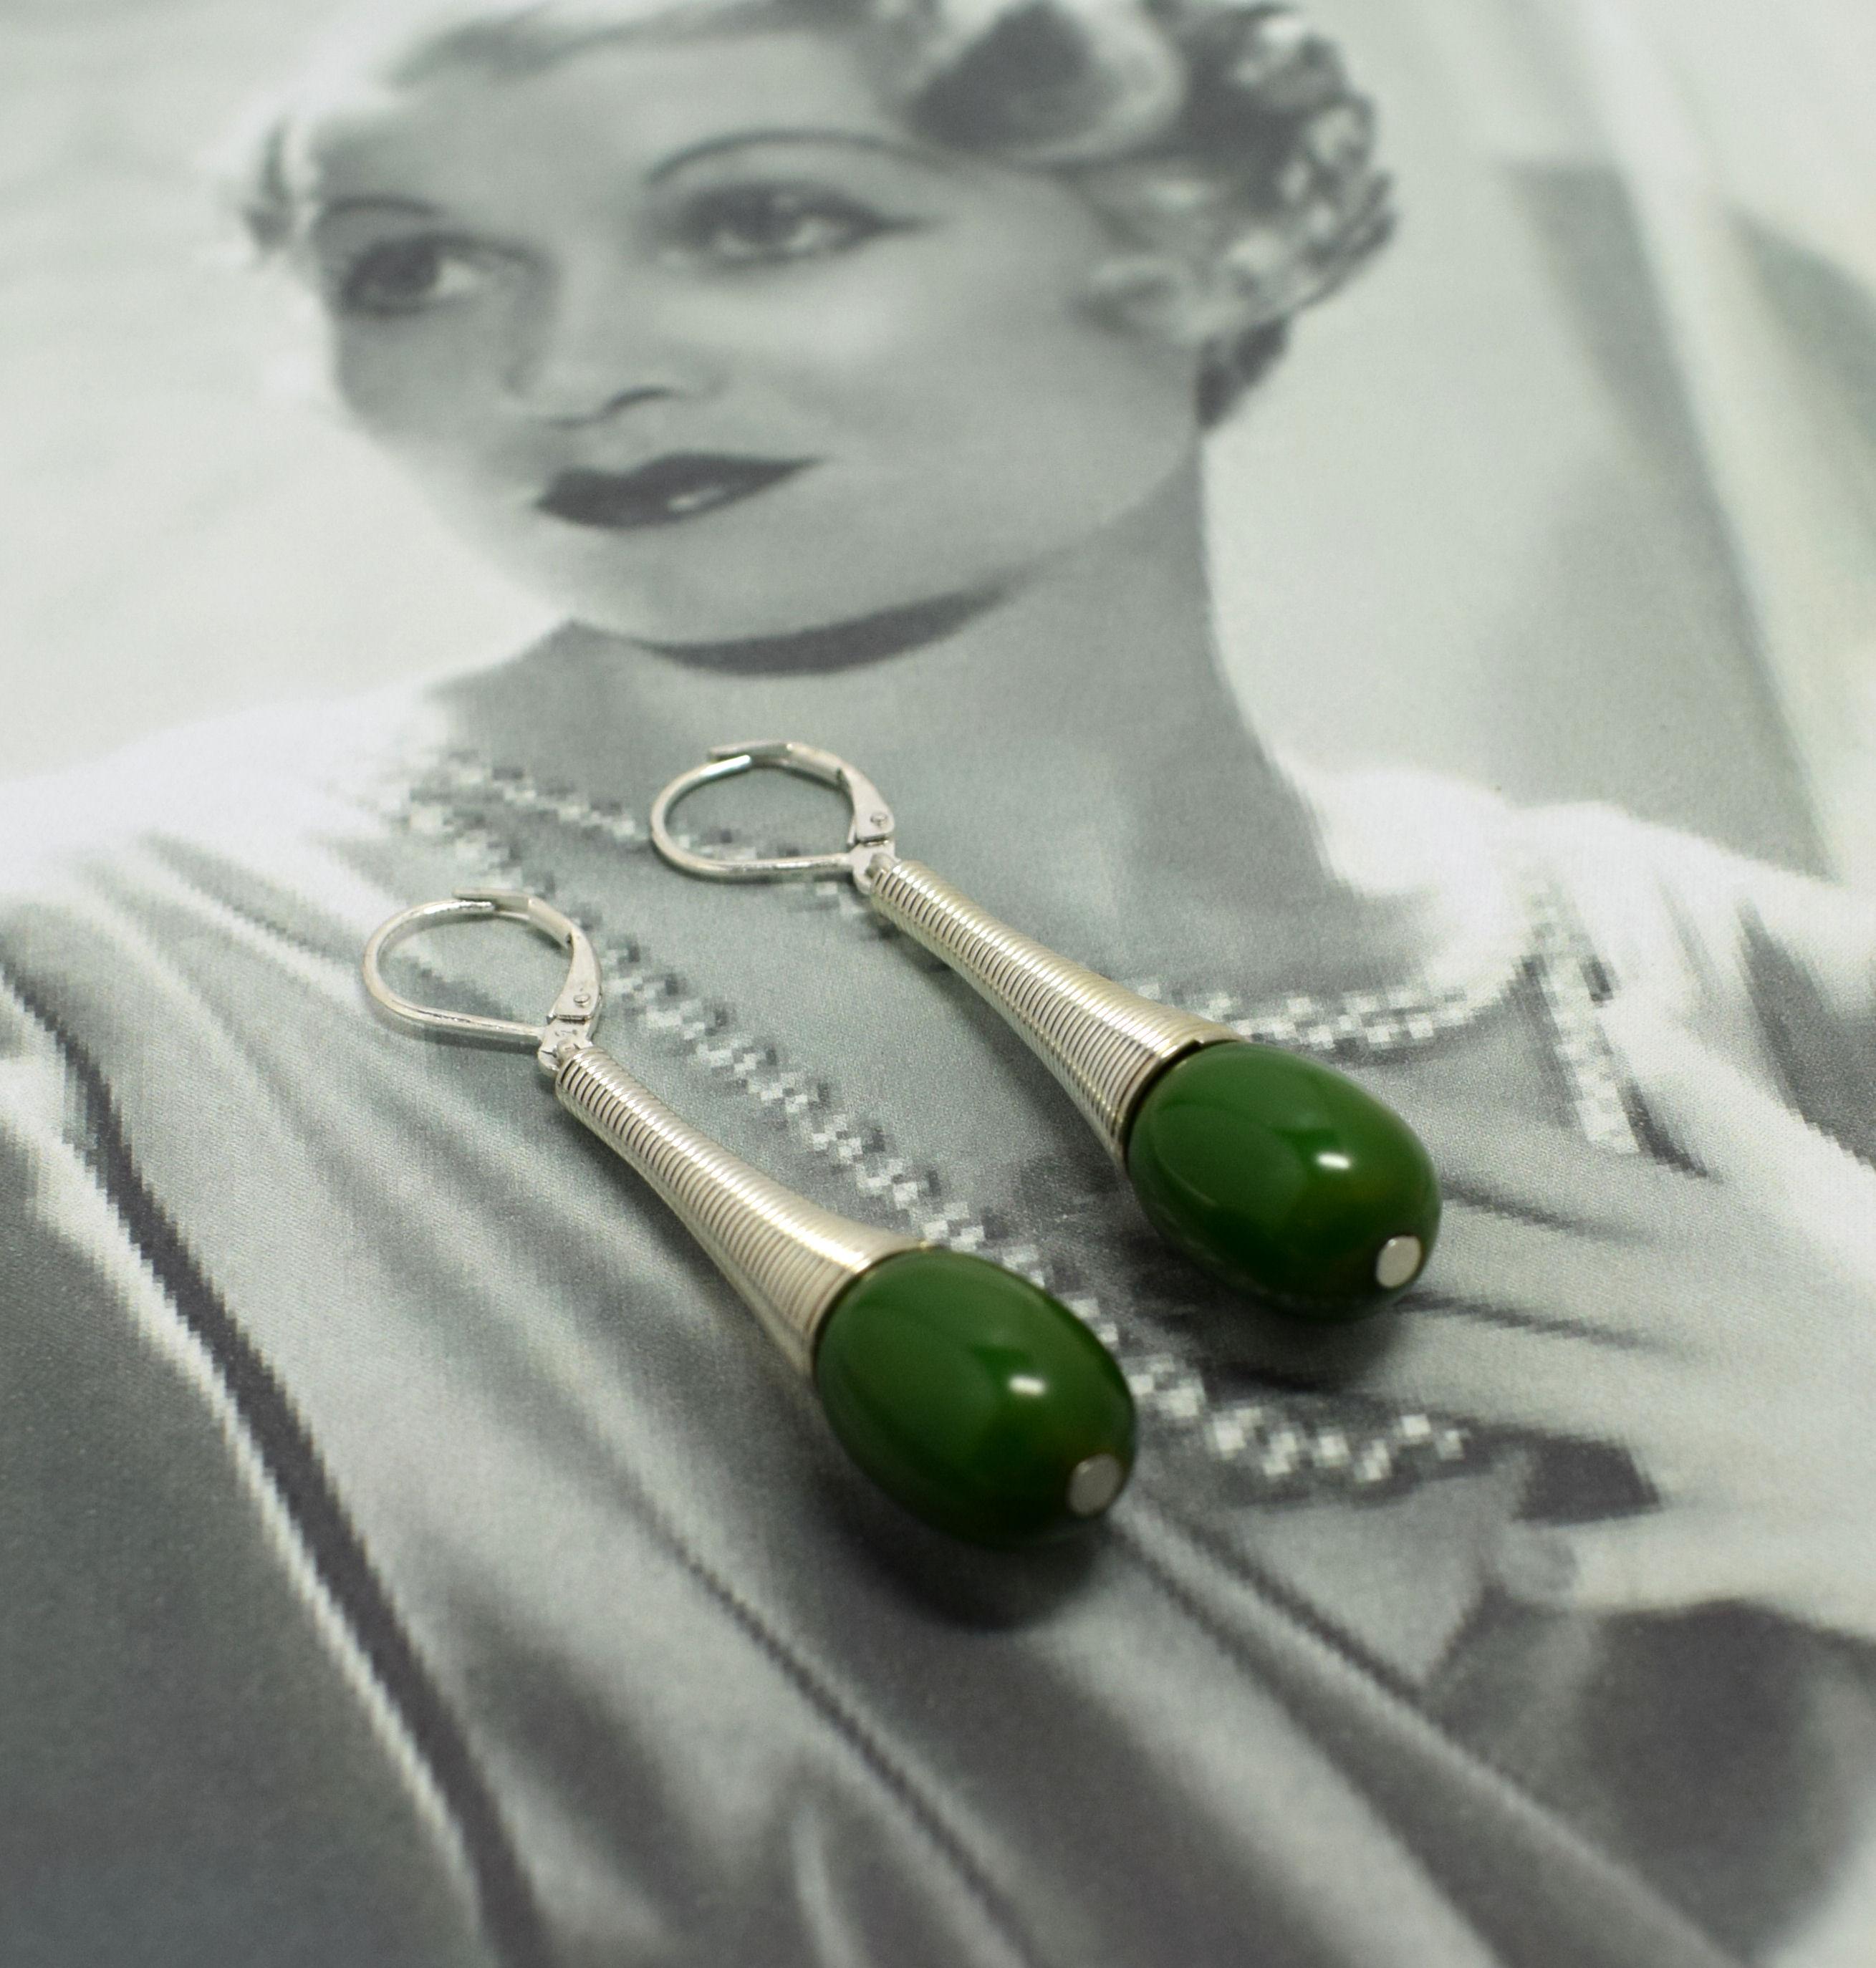 Fabulously stylish 1930's Art Deco modernist earrings. The phenolic bakelite is a deep pea green colour. The chromed metal is bright and crisp with no tarnishing or pitting. Lovely length when worn and ideal for day or evening wear. As one of the